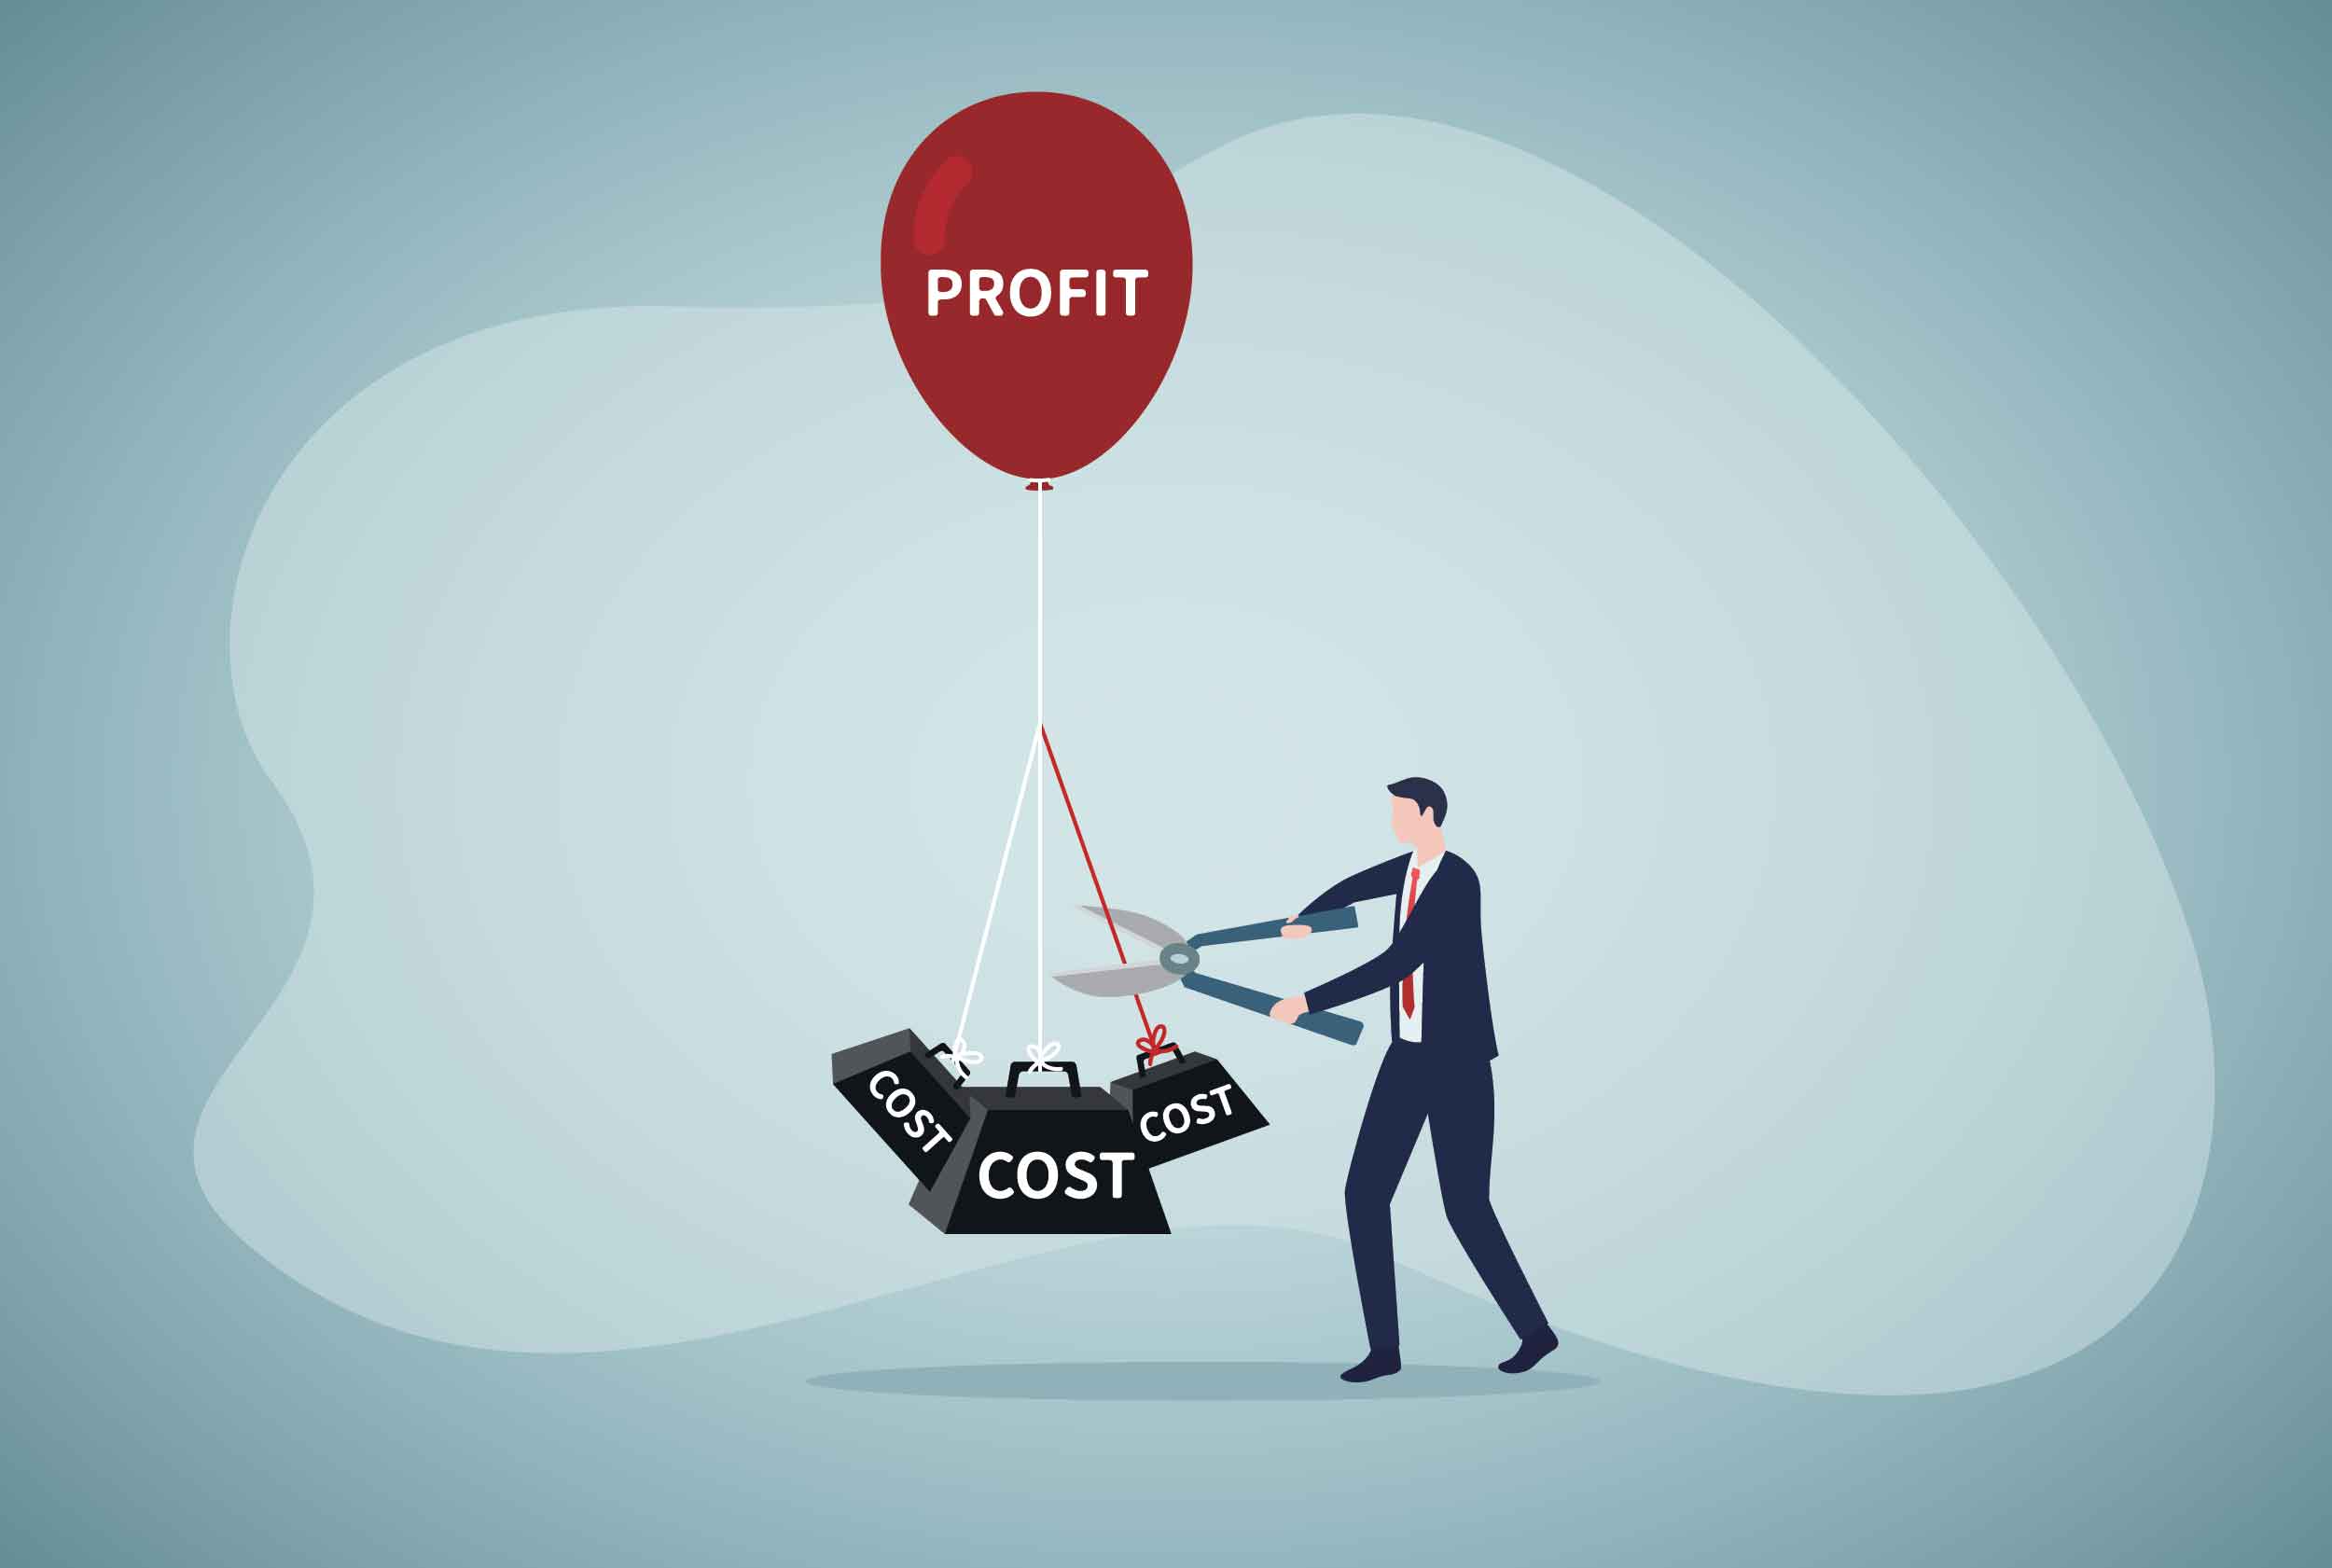 3 ways to reduce cost